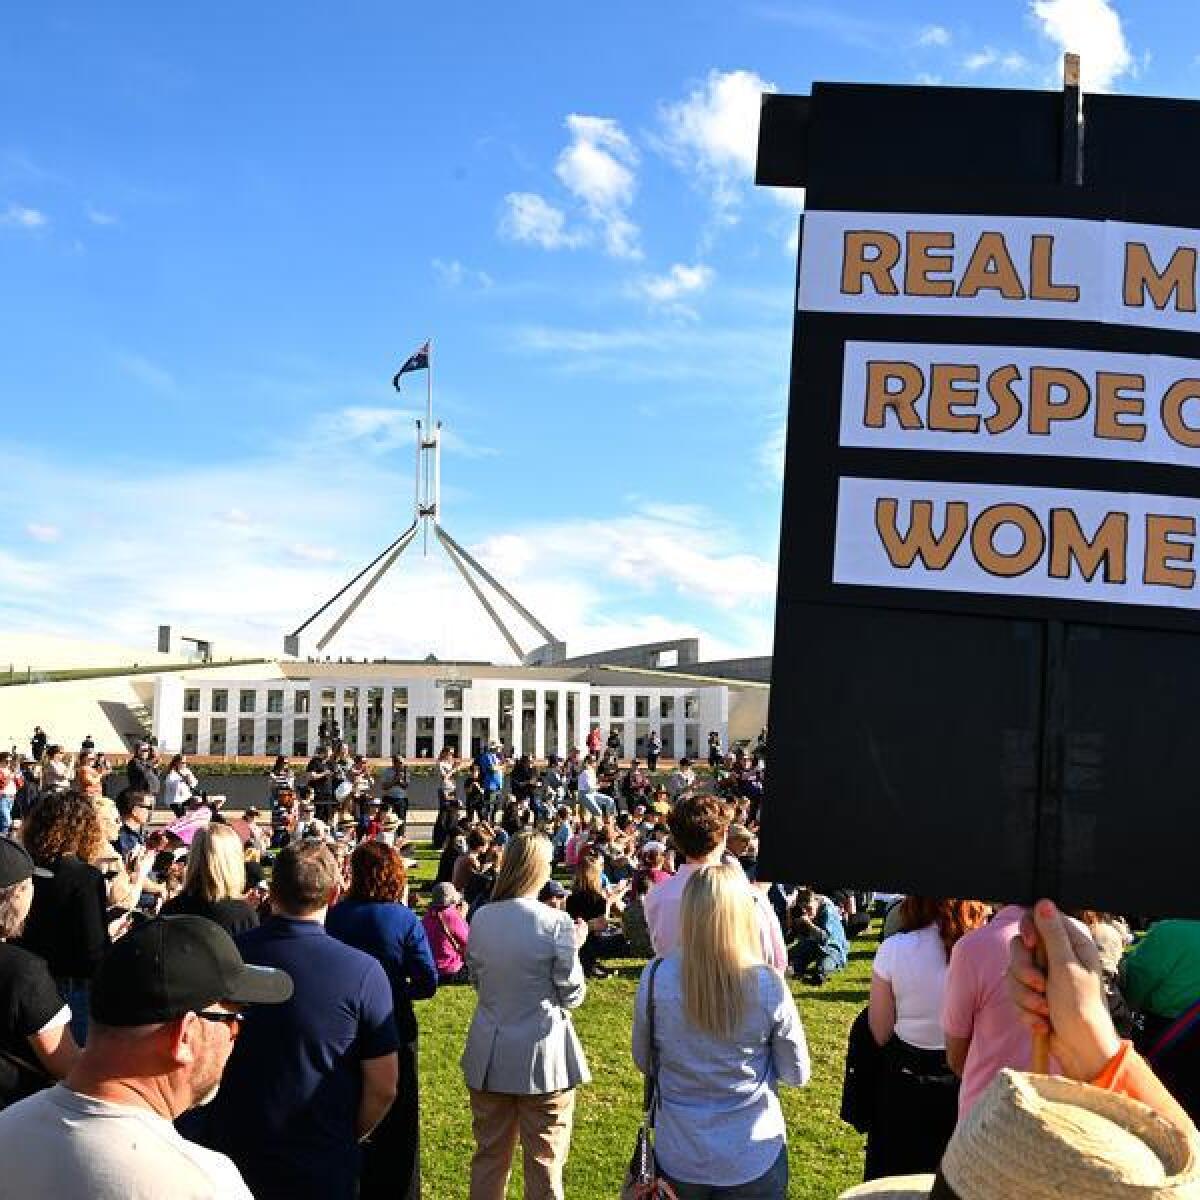 People at a rally to a call for action to end violence against women